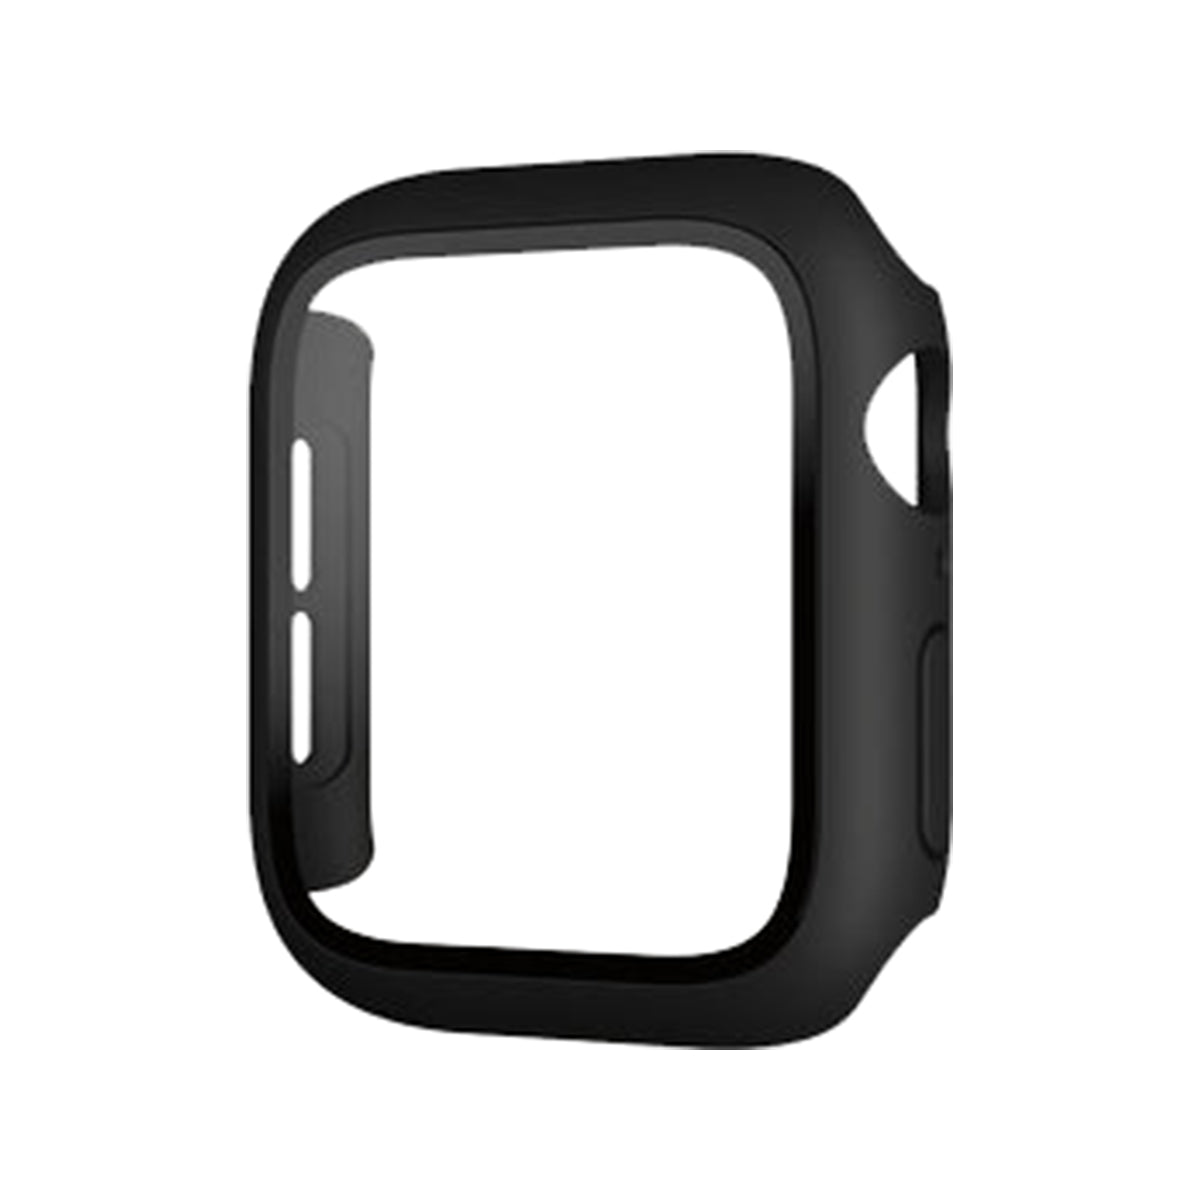 PanzerGlass Full Body Screen Protector for Apple Watch 4/5/6/SE 44mm - Black